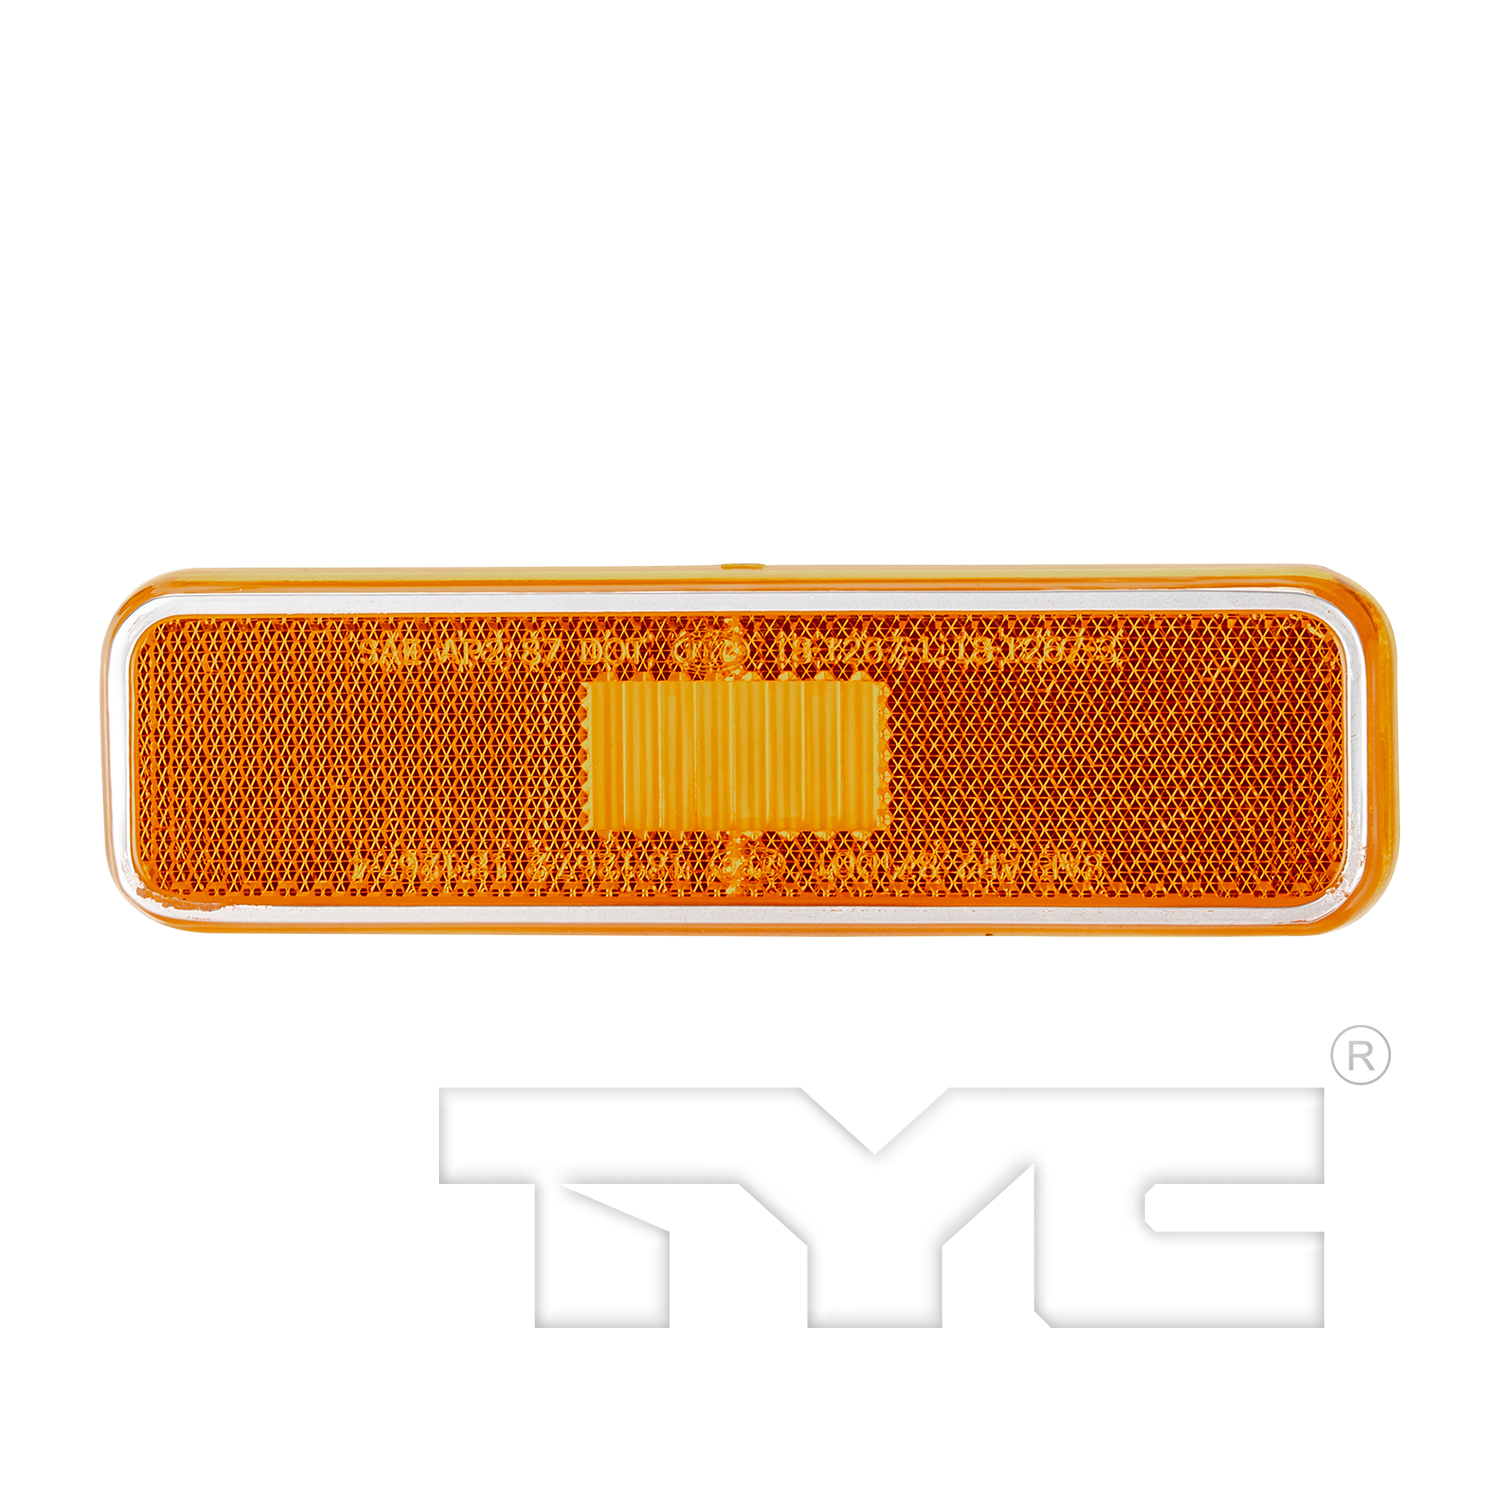 Aftermarket LAMPS for DODGE - W150, W150,81-93,LT Front marker lamp assy